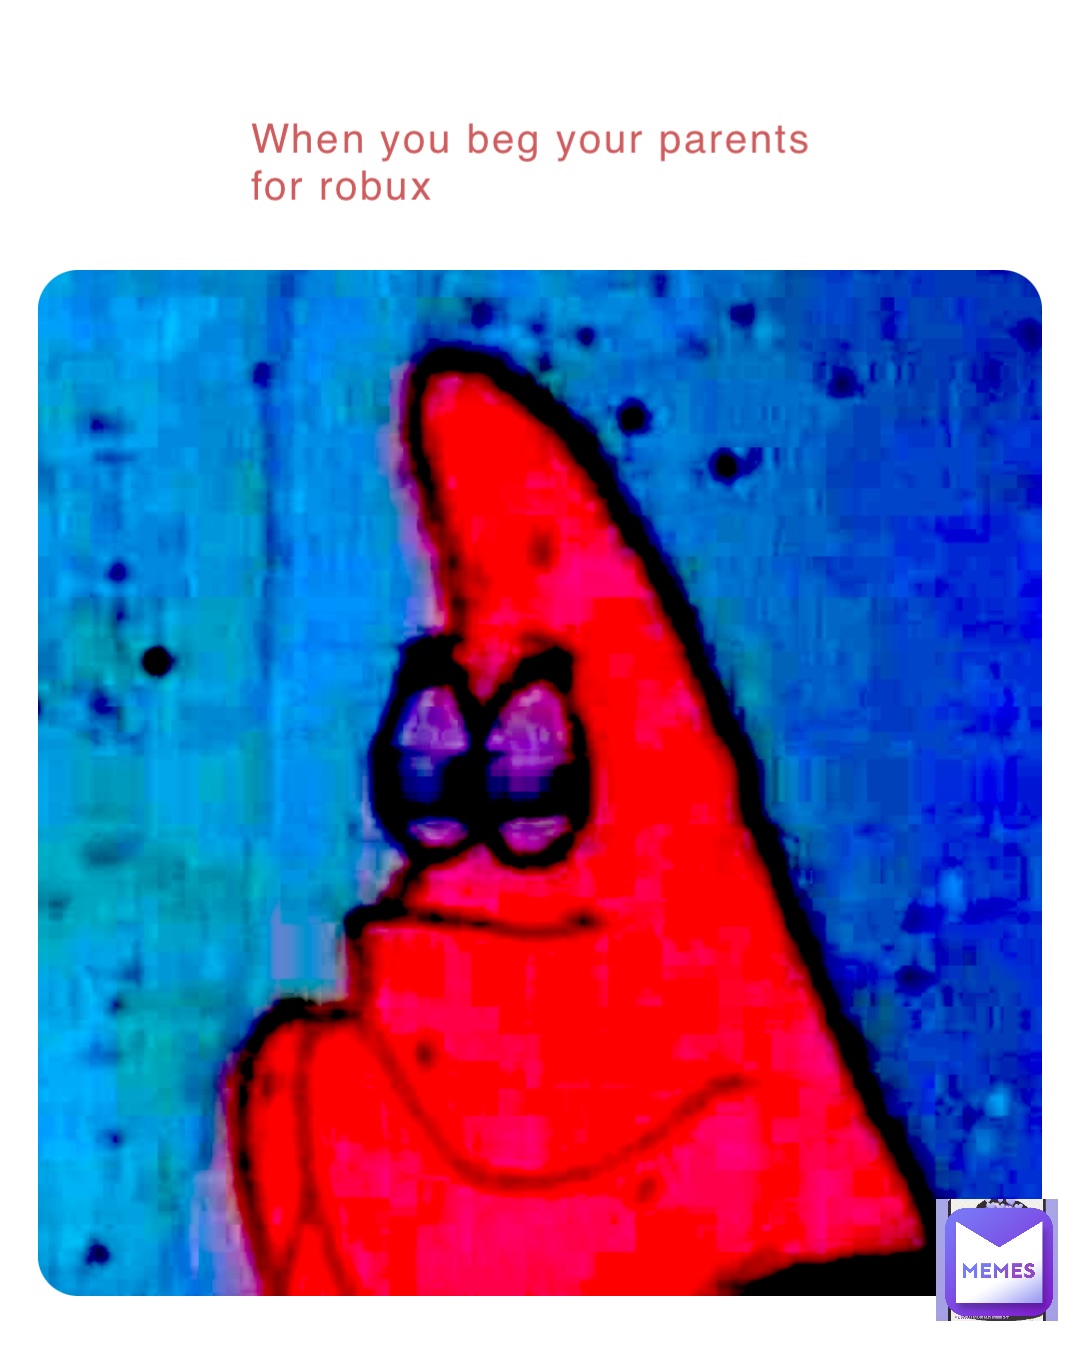 When you beg your parents for robux